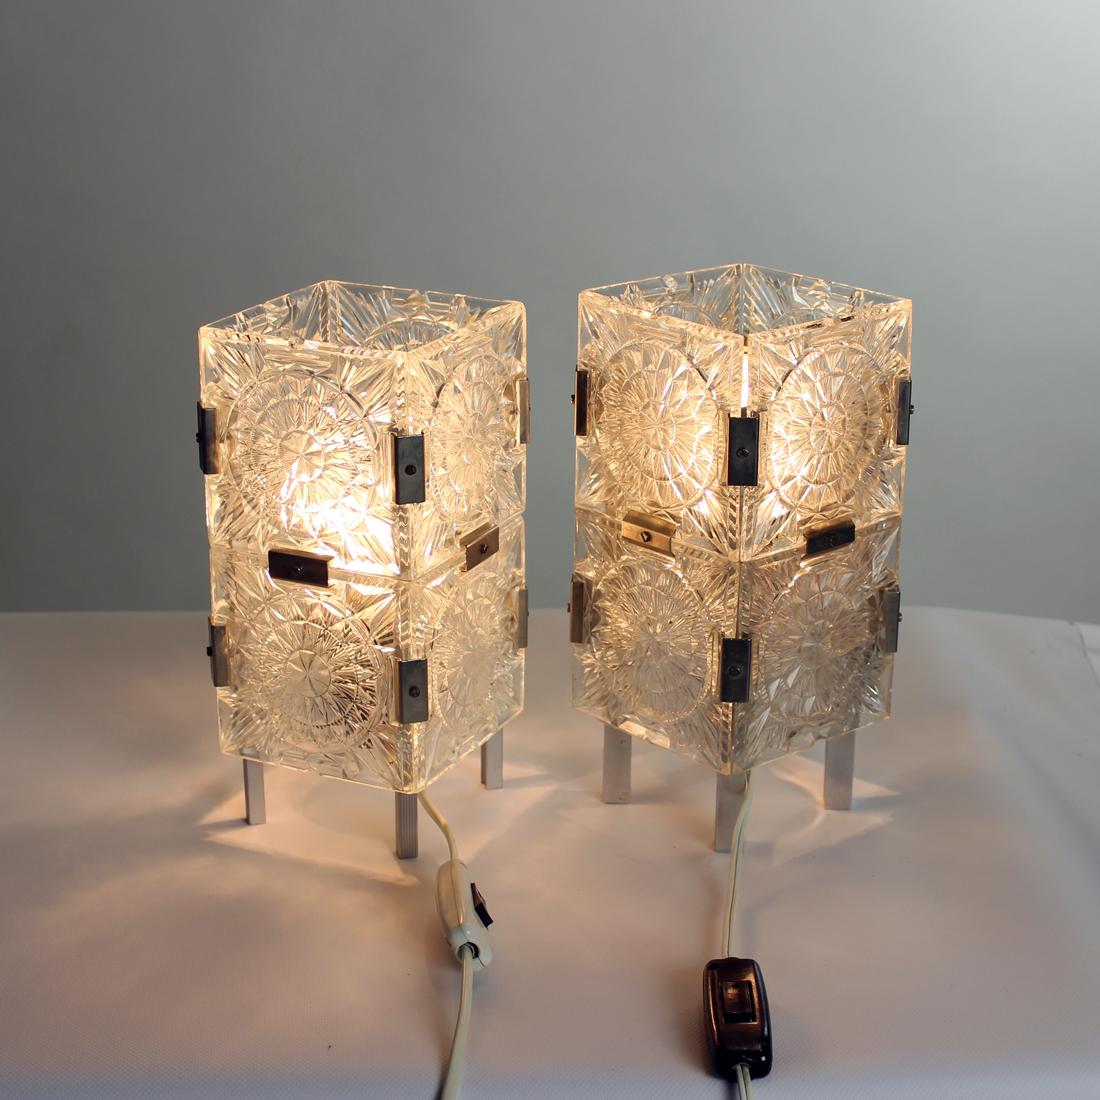 Vintage Pair of Table Lamps by Kamenicky Senov, Czechoslovakia, 1970s For Sale 1